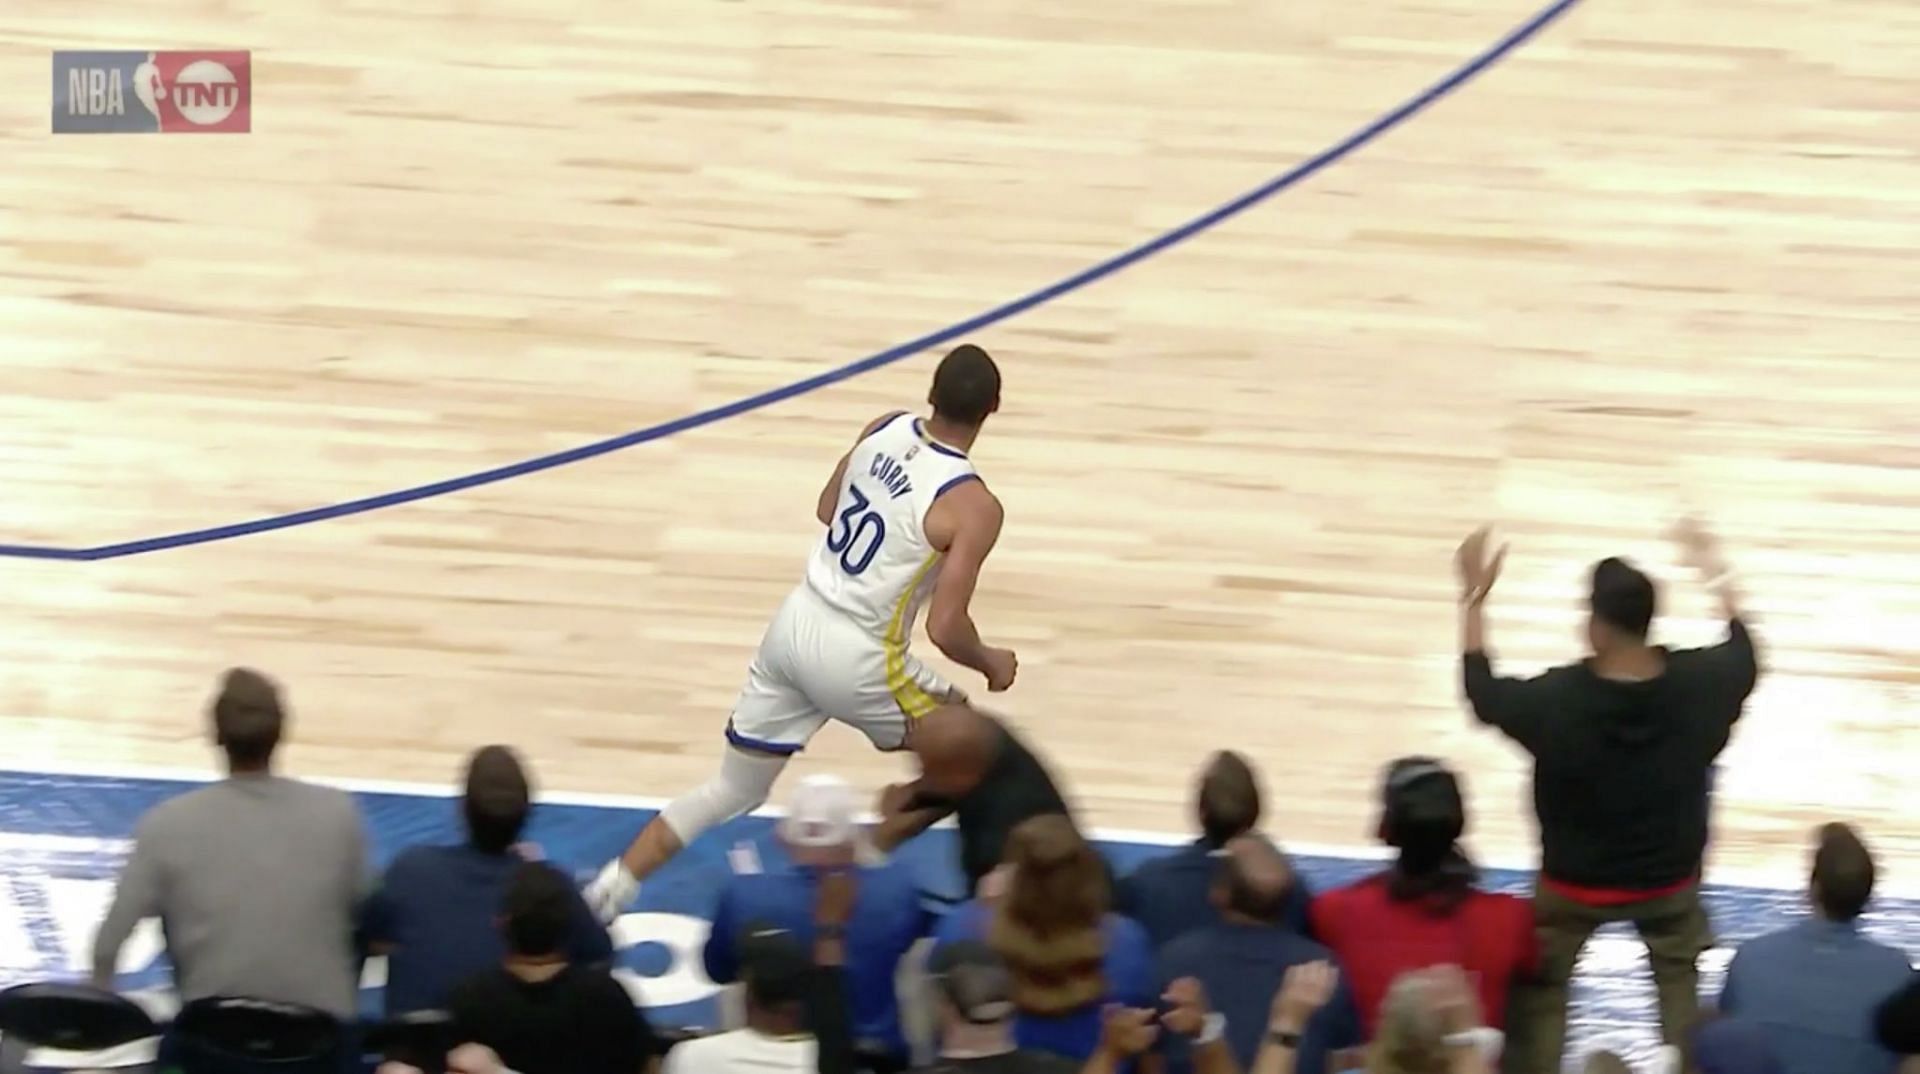 An American Airlines Arena waiter&#039;s tray caused Steph Curry to trip in the first half of Game 3 between the Golden State Warriors and Dallas Mavericks. [Photo: SFGate]